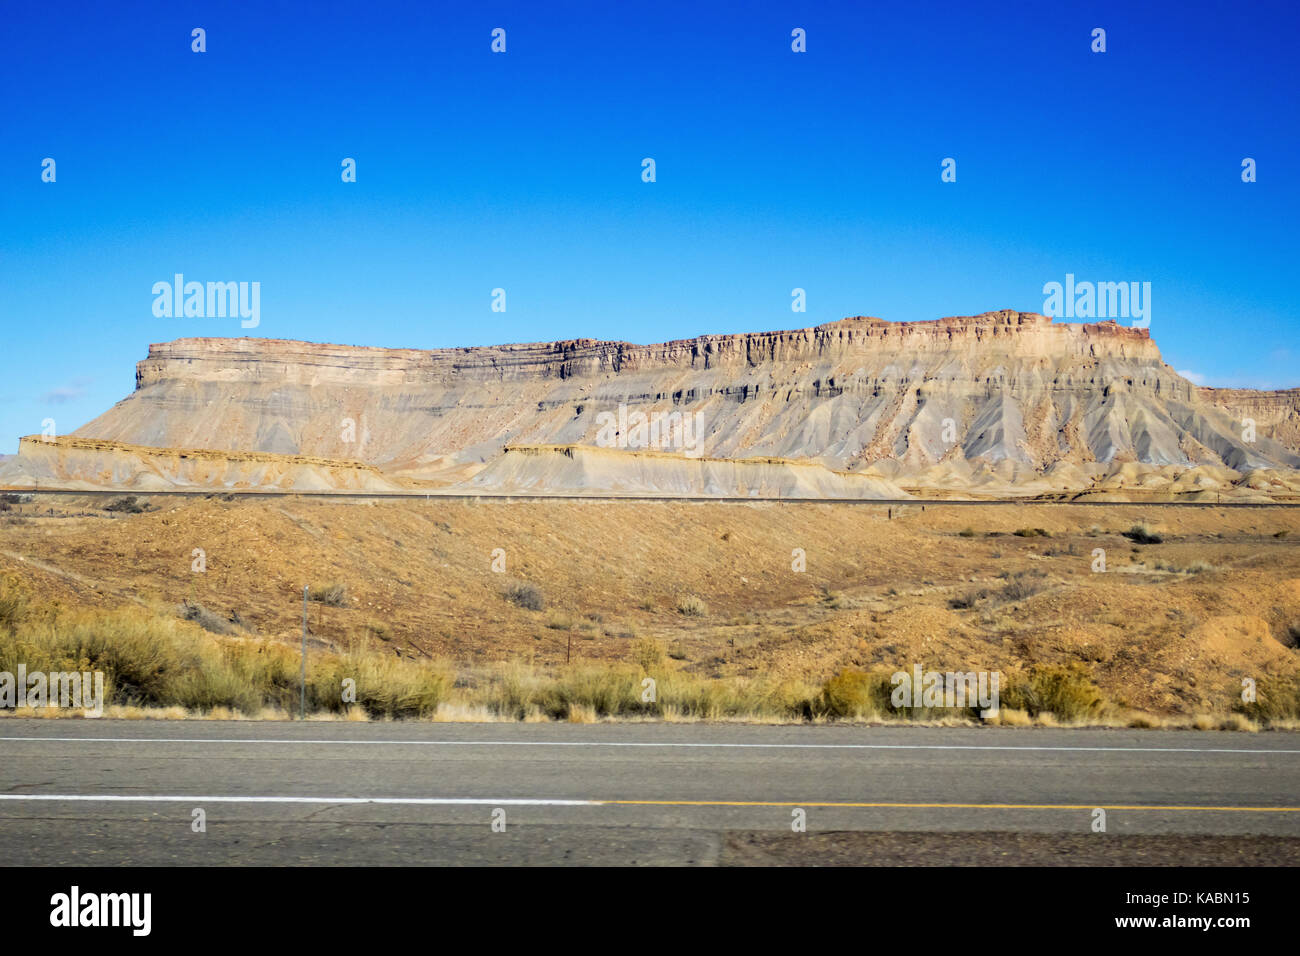 A rock plateau standing up on a blue sky with a road running past. Stock Photo